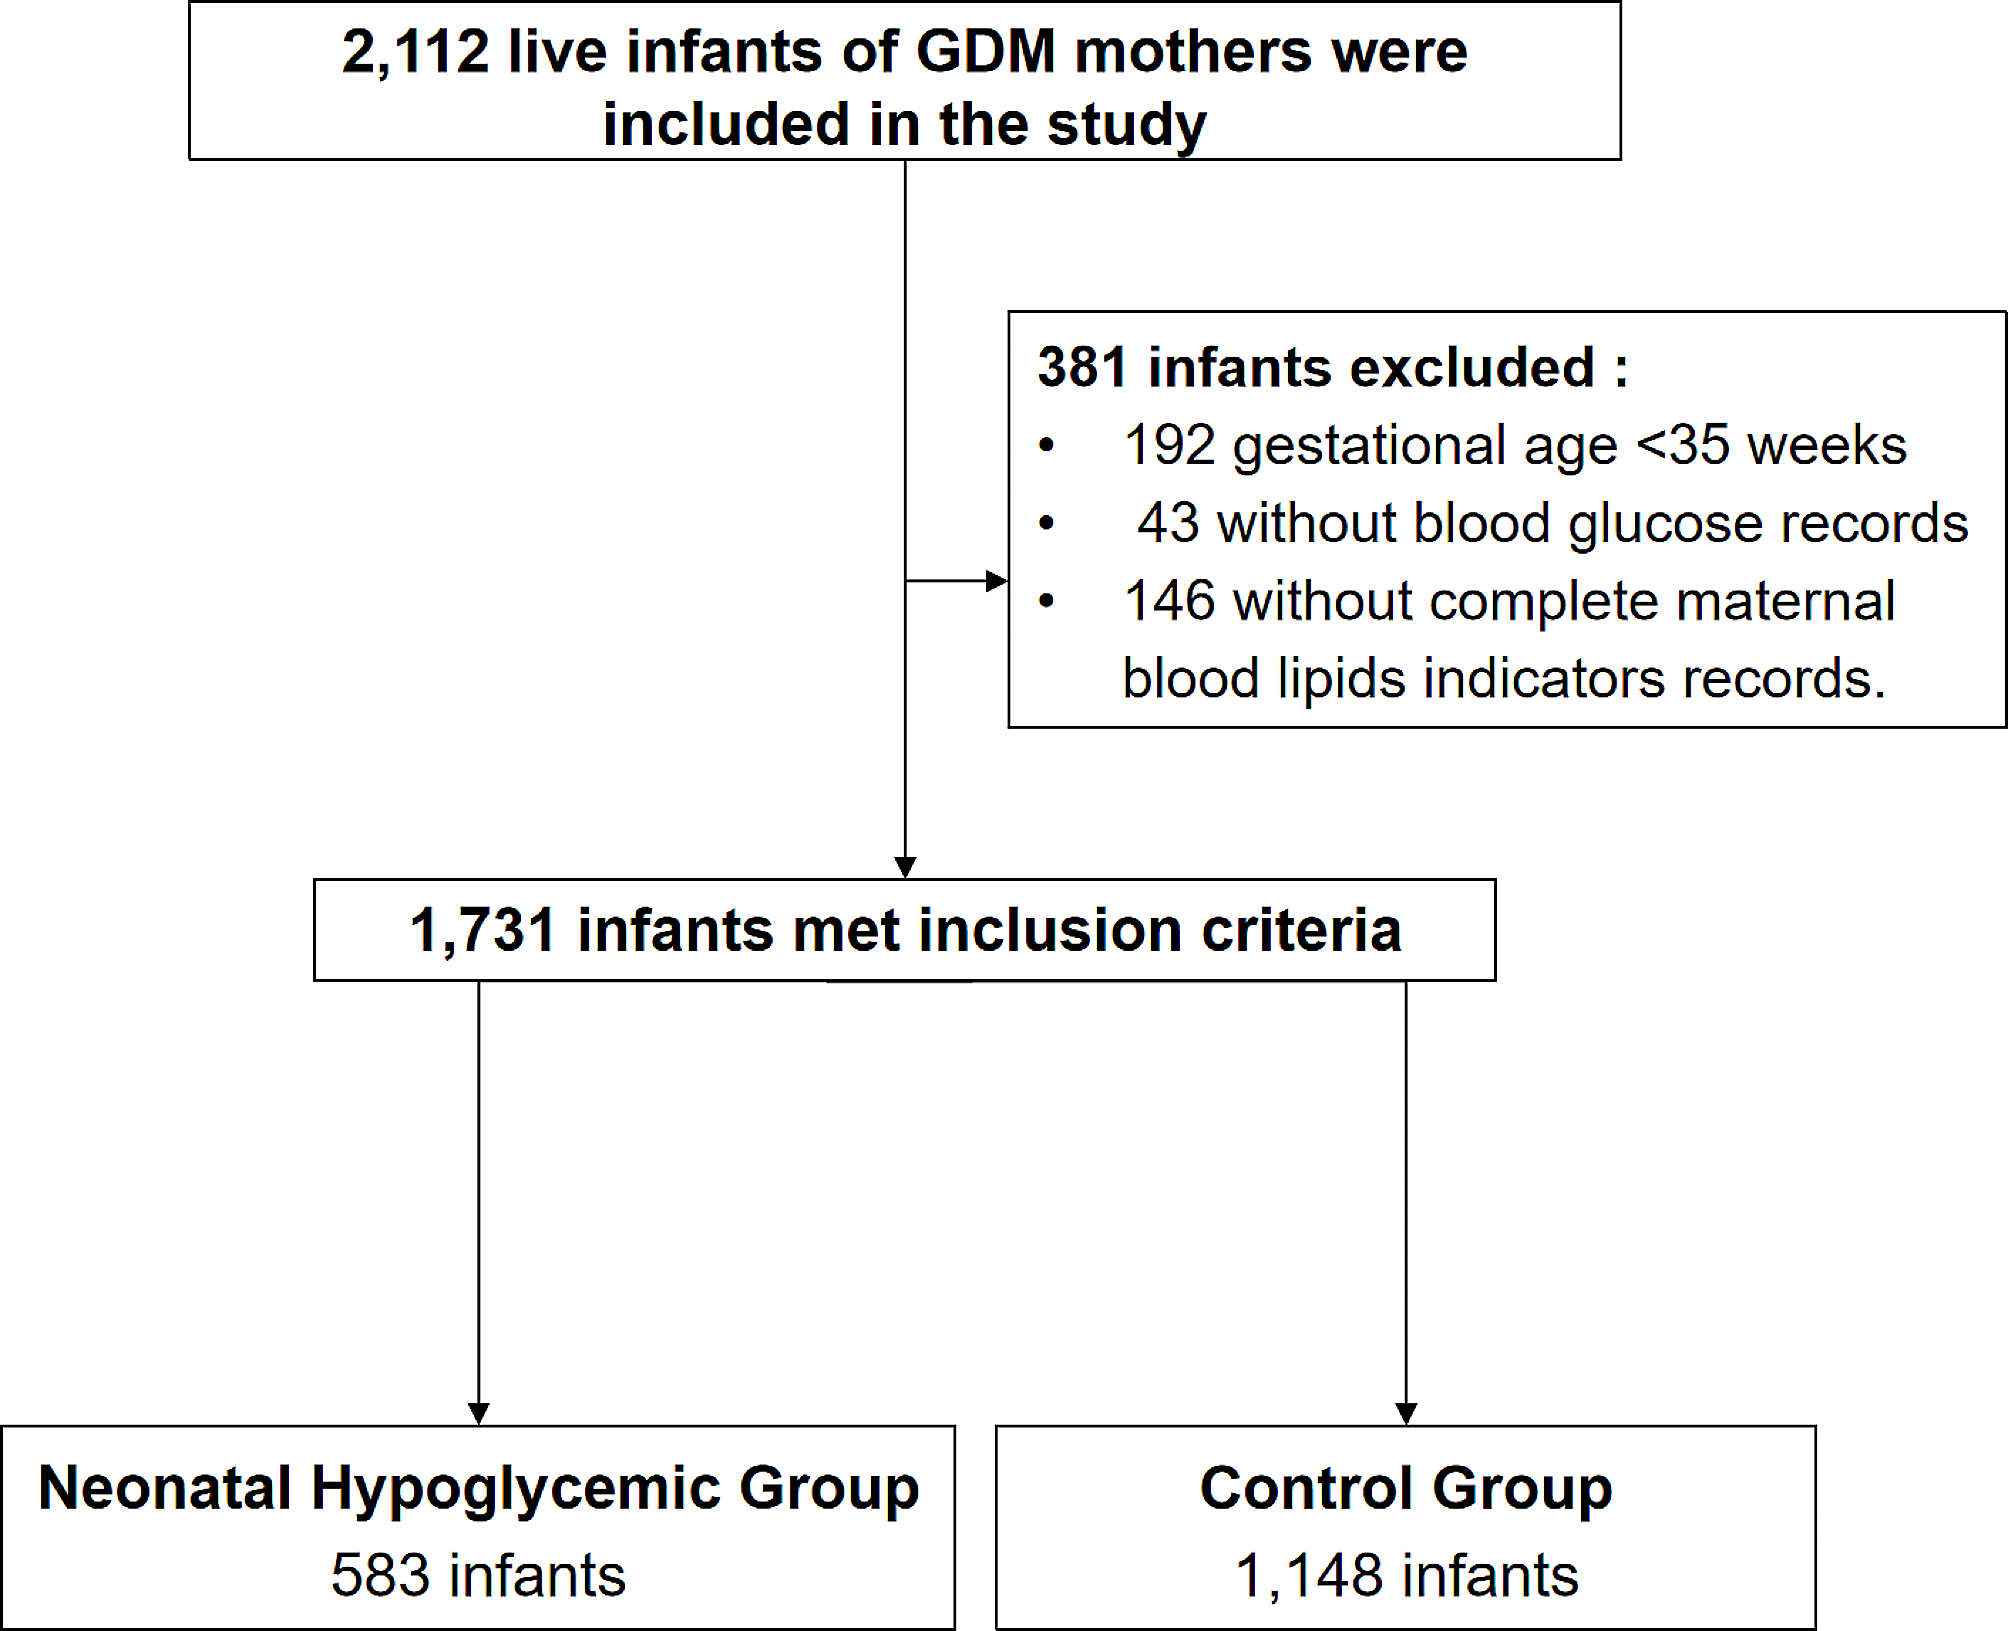 Association between maternal blood lipids and neonatal hypoglycaemia in pregnancy with gestational diabetes mellitus: a cohort study